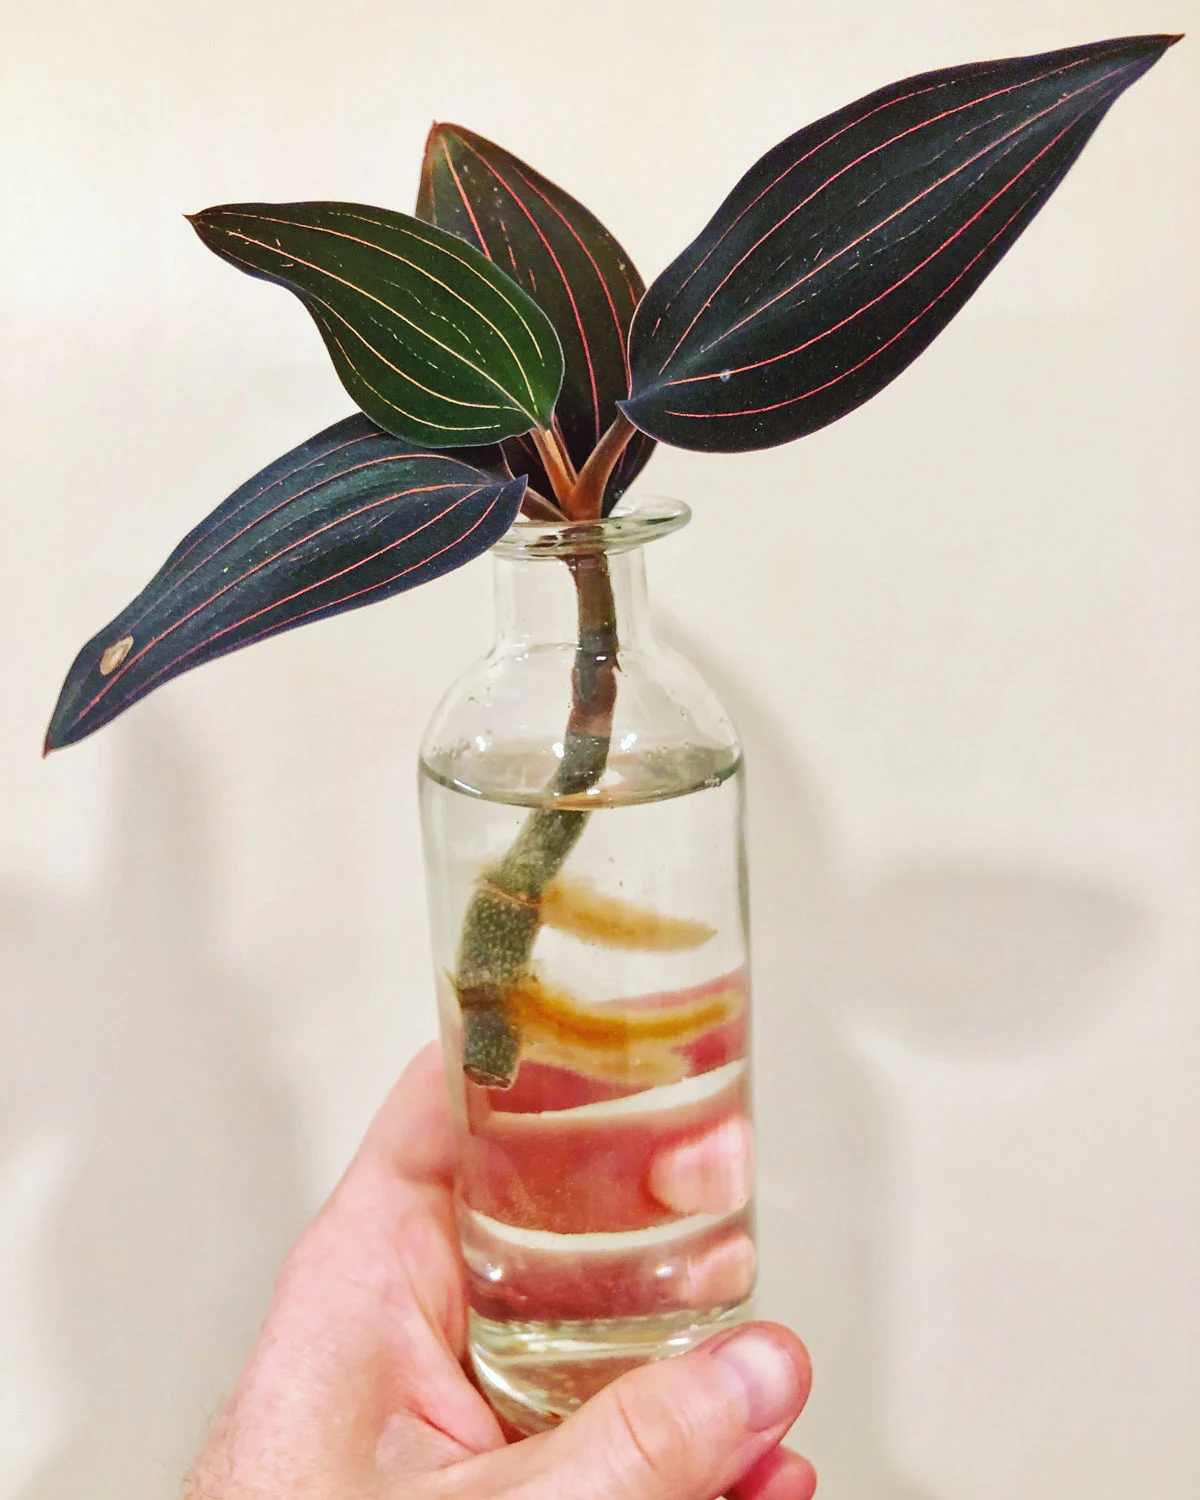 jewel-orchid-plants-to-propagate-in-water